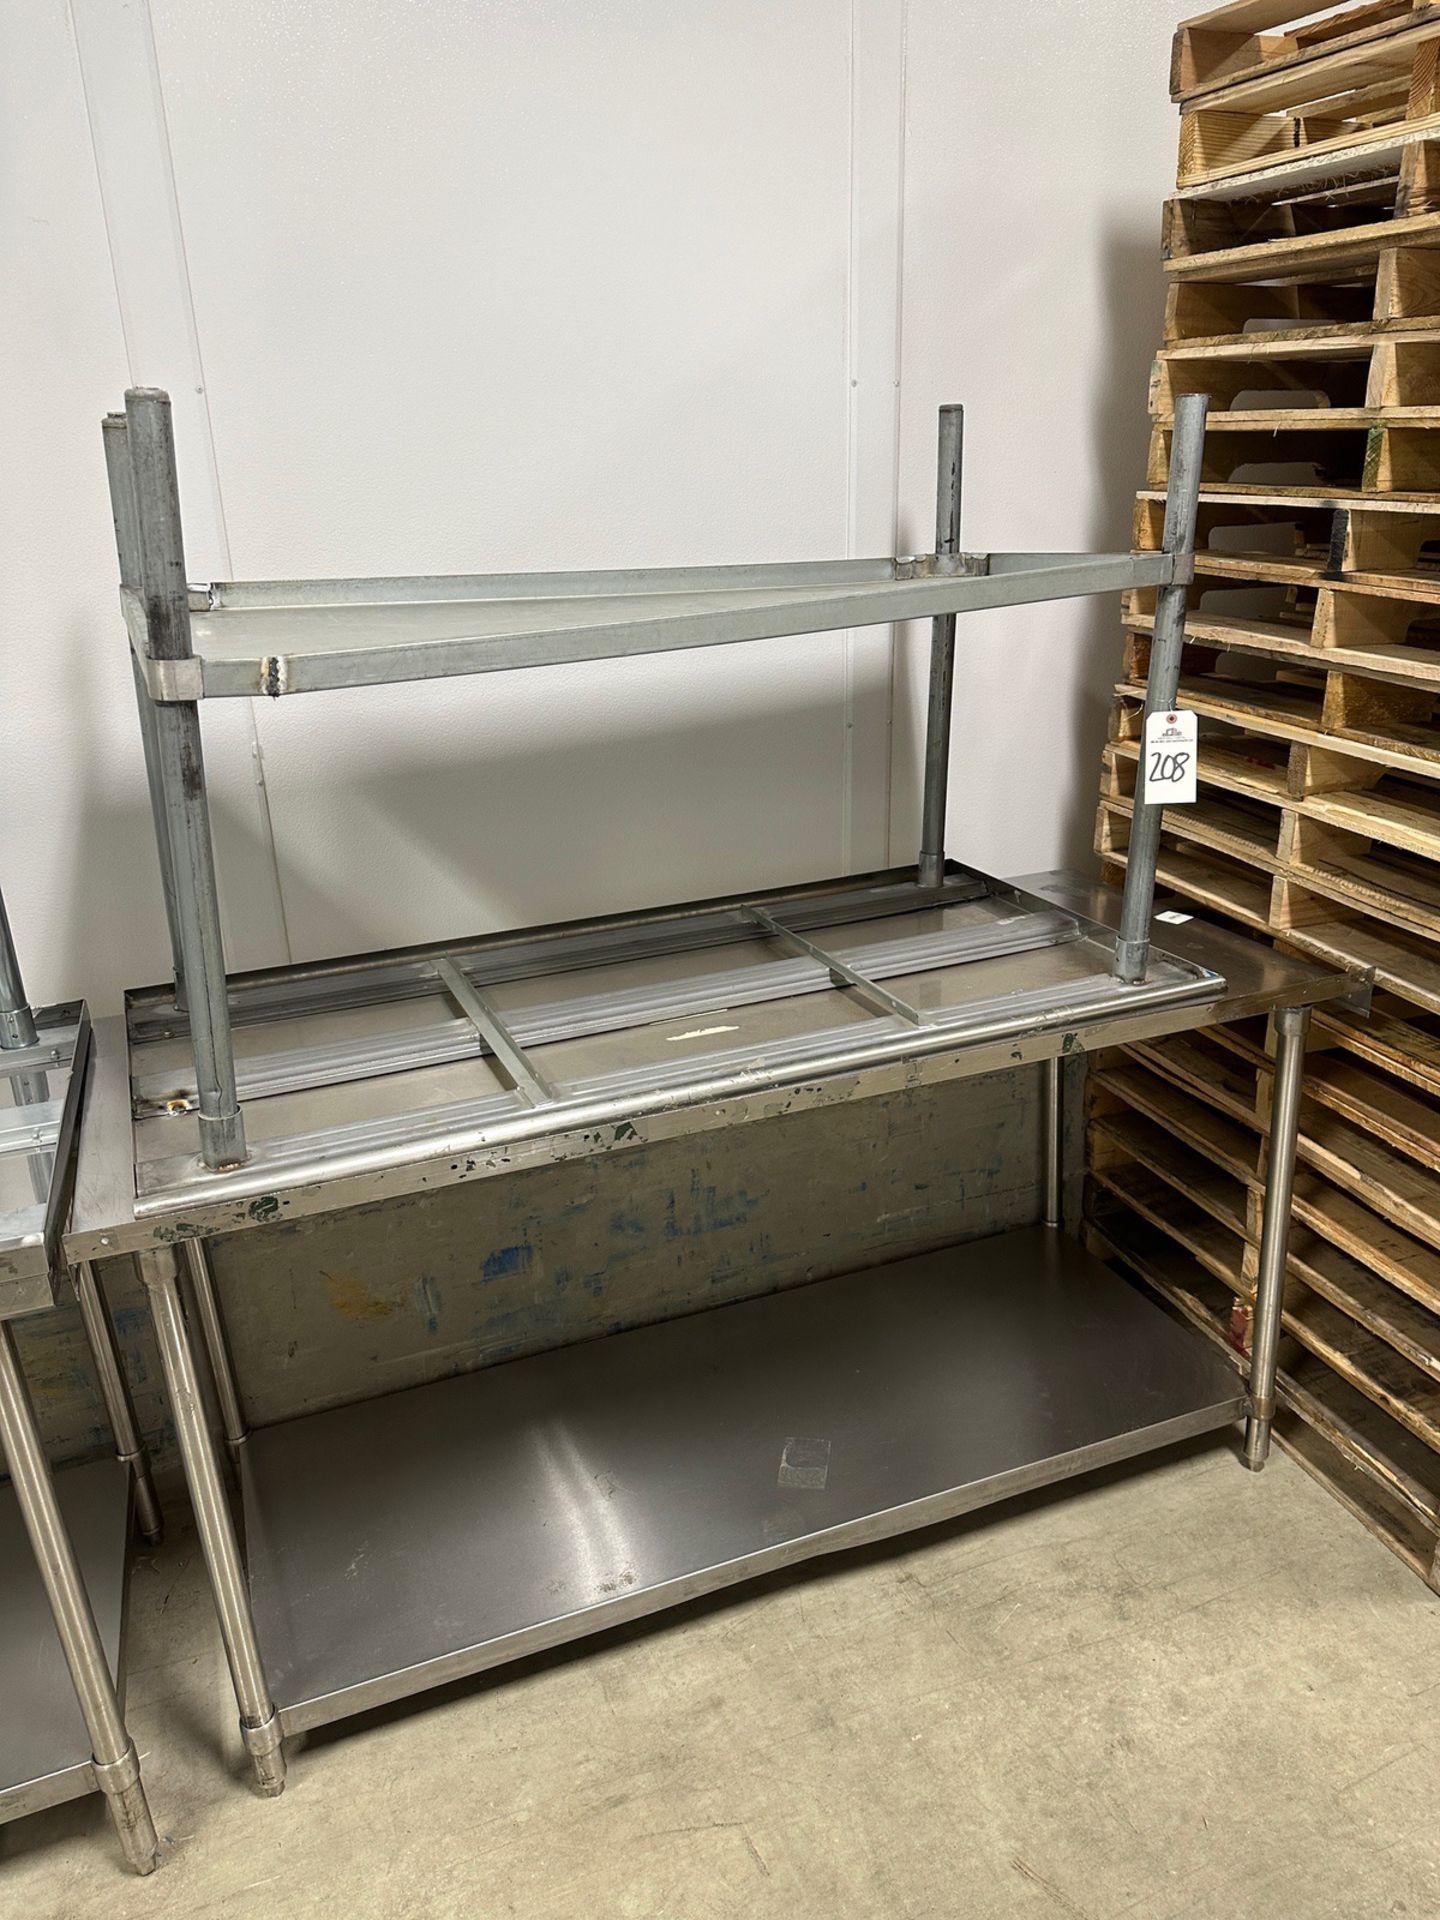 Lot of (2) Stainless Steel Tables (Approx. 30" x 6' and 30" x 5') | Rig Fee $100